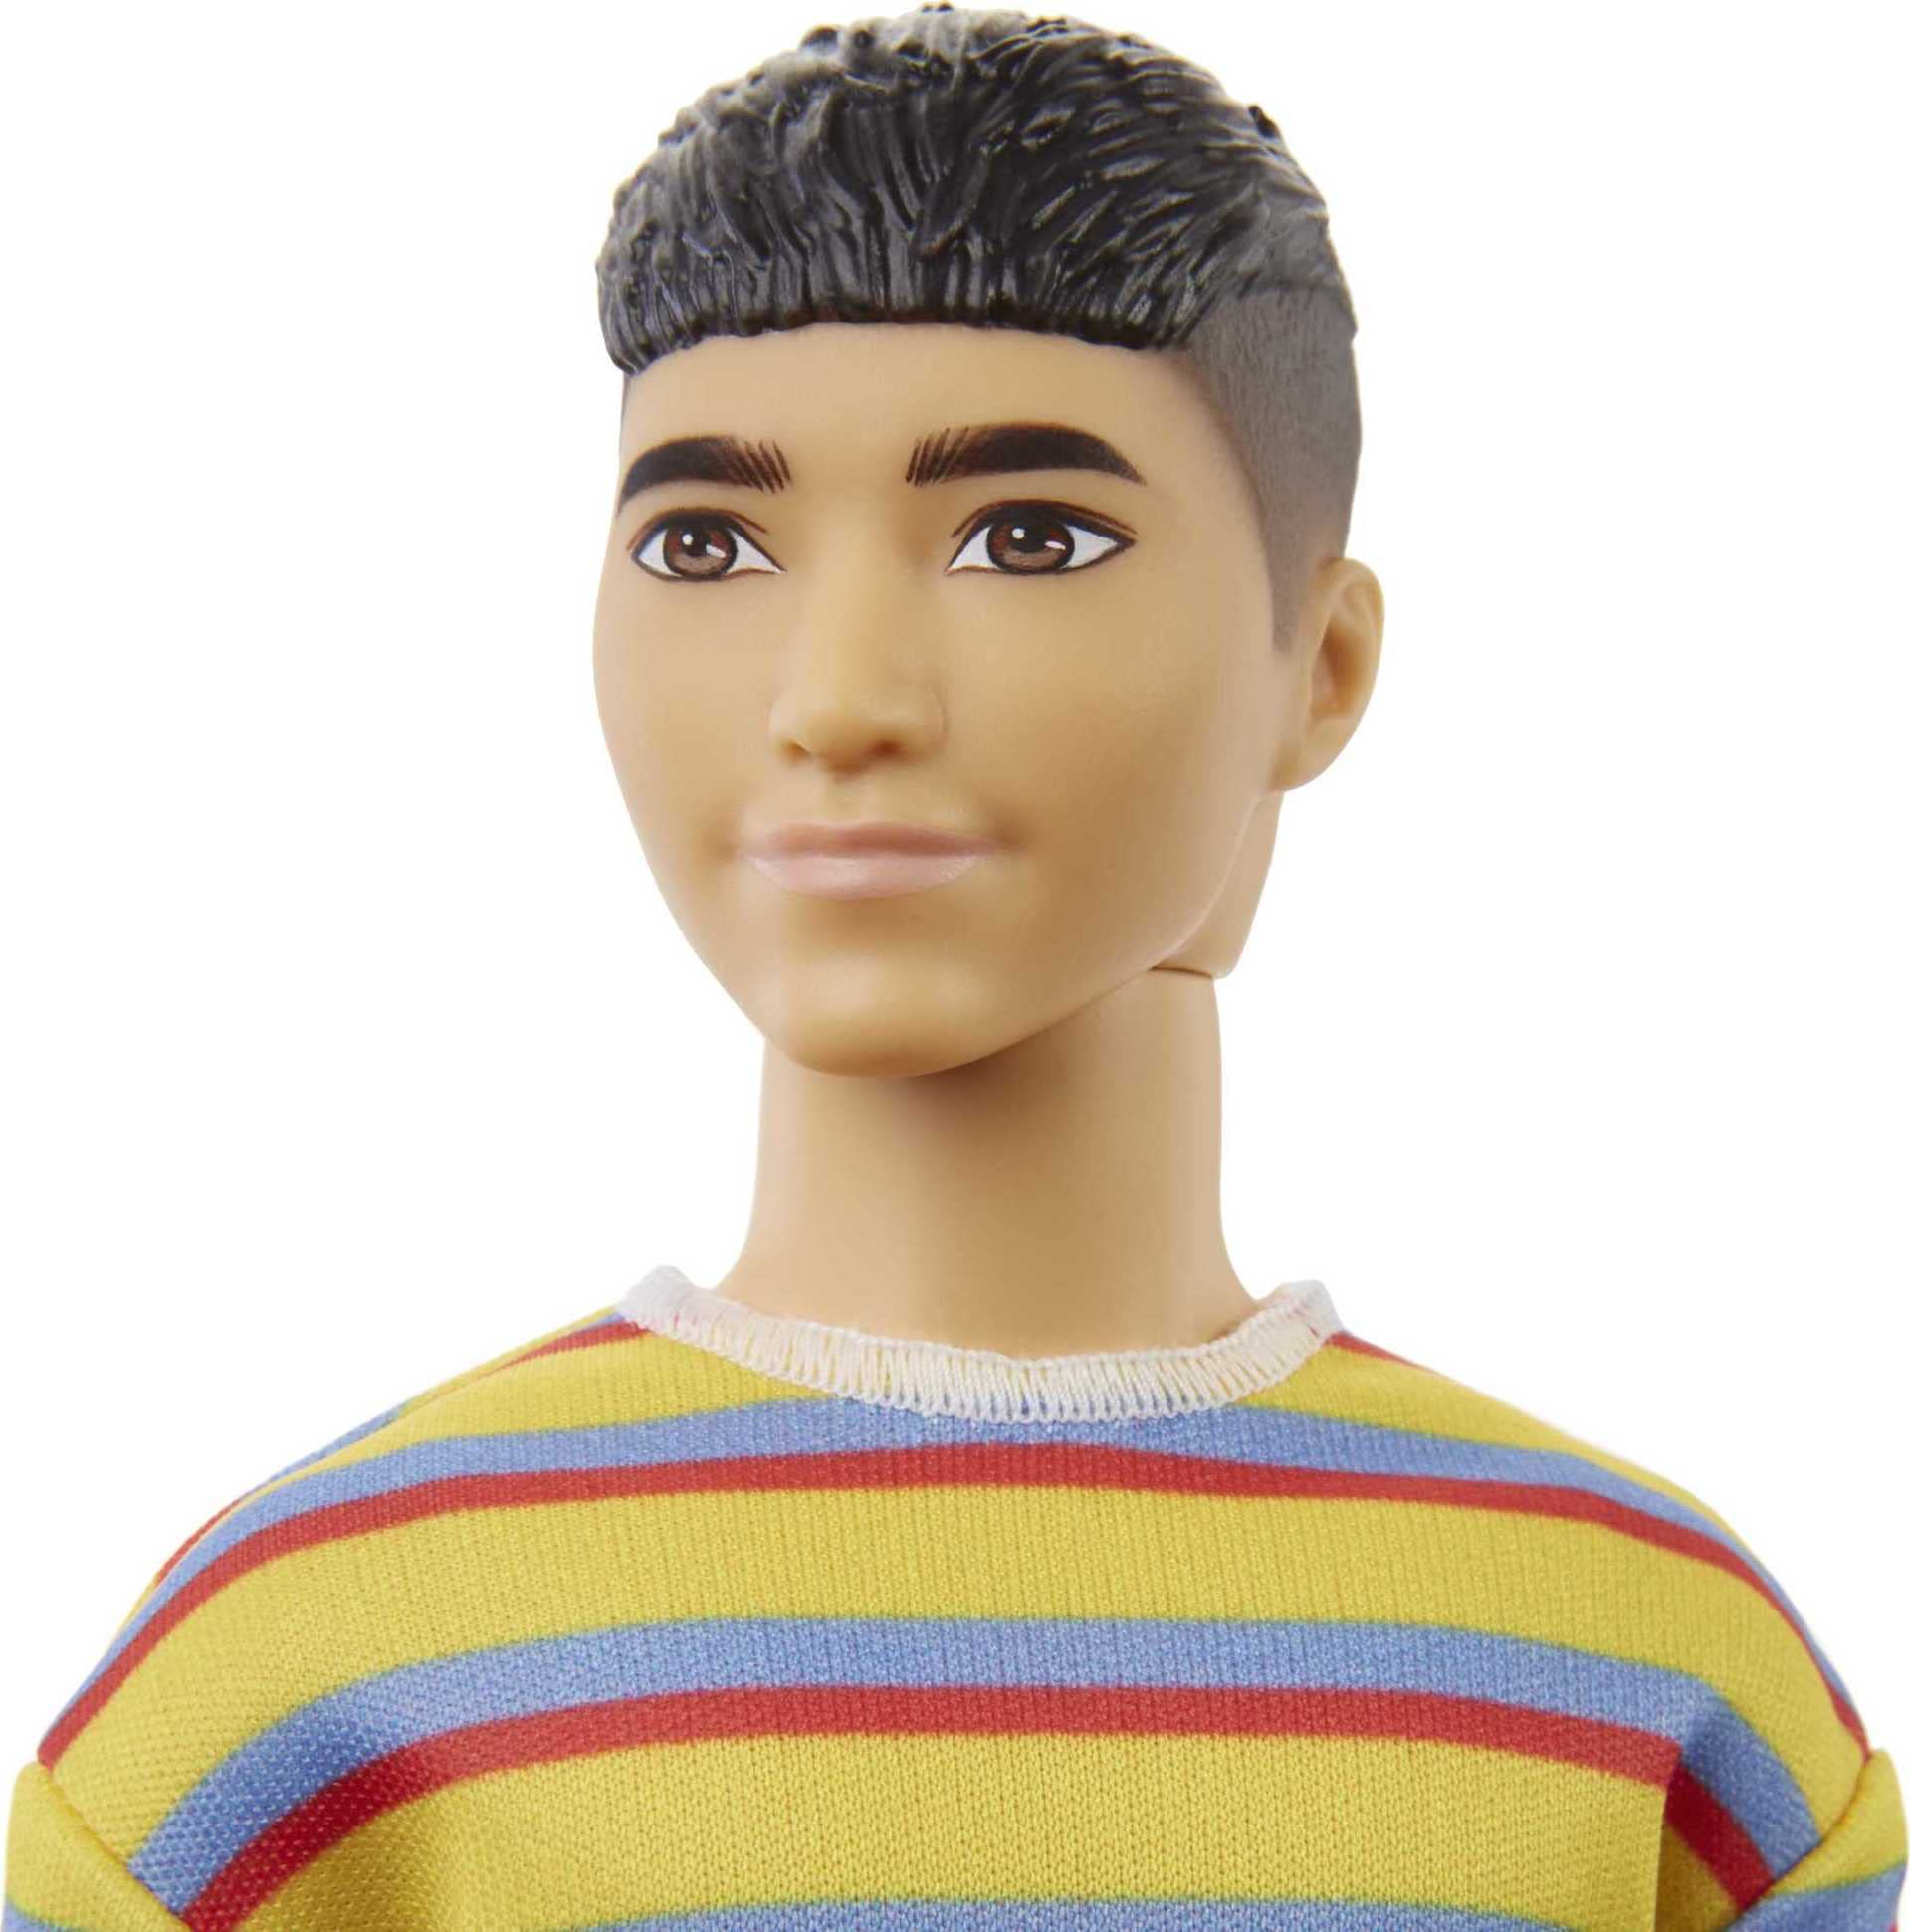 Barbie Ken Fashionistas Doll #175 with Brunette Hair Dressed in Colorful Striped Shirt, Denim Shorts and White Boots